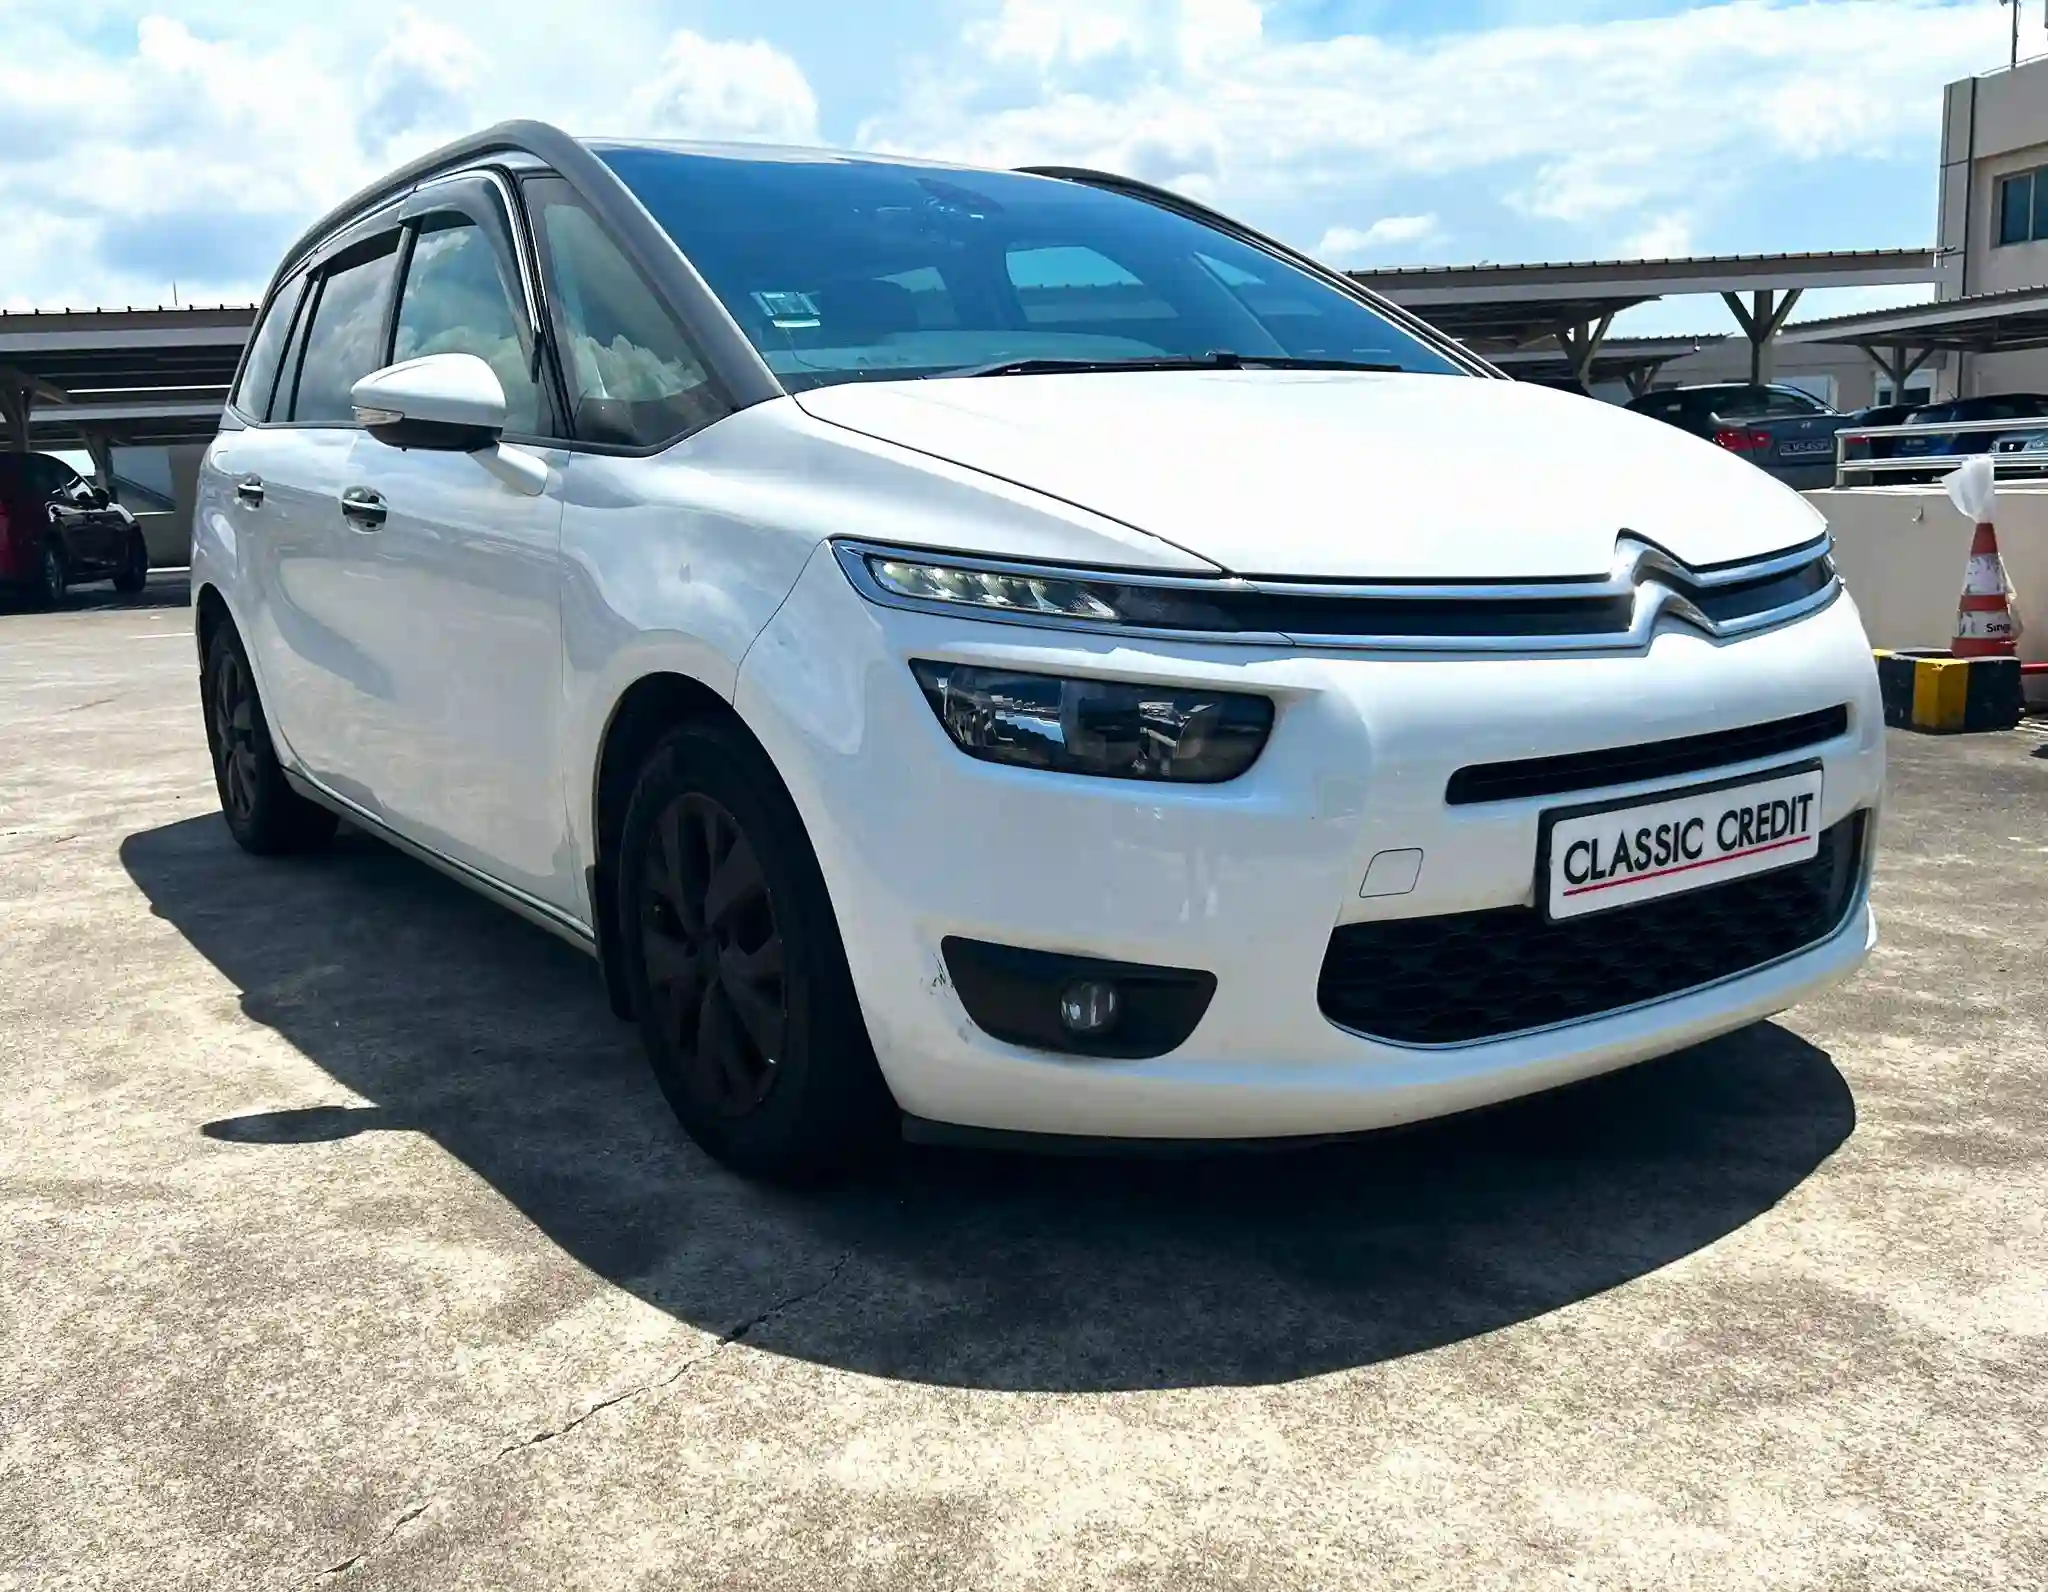 Citroen Grand C4 Picasso Diesel 1.6A BlueHDi Panoramic Roof